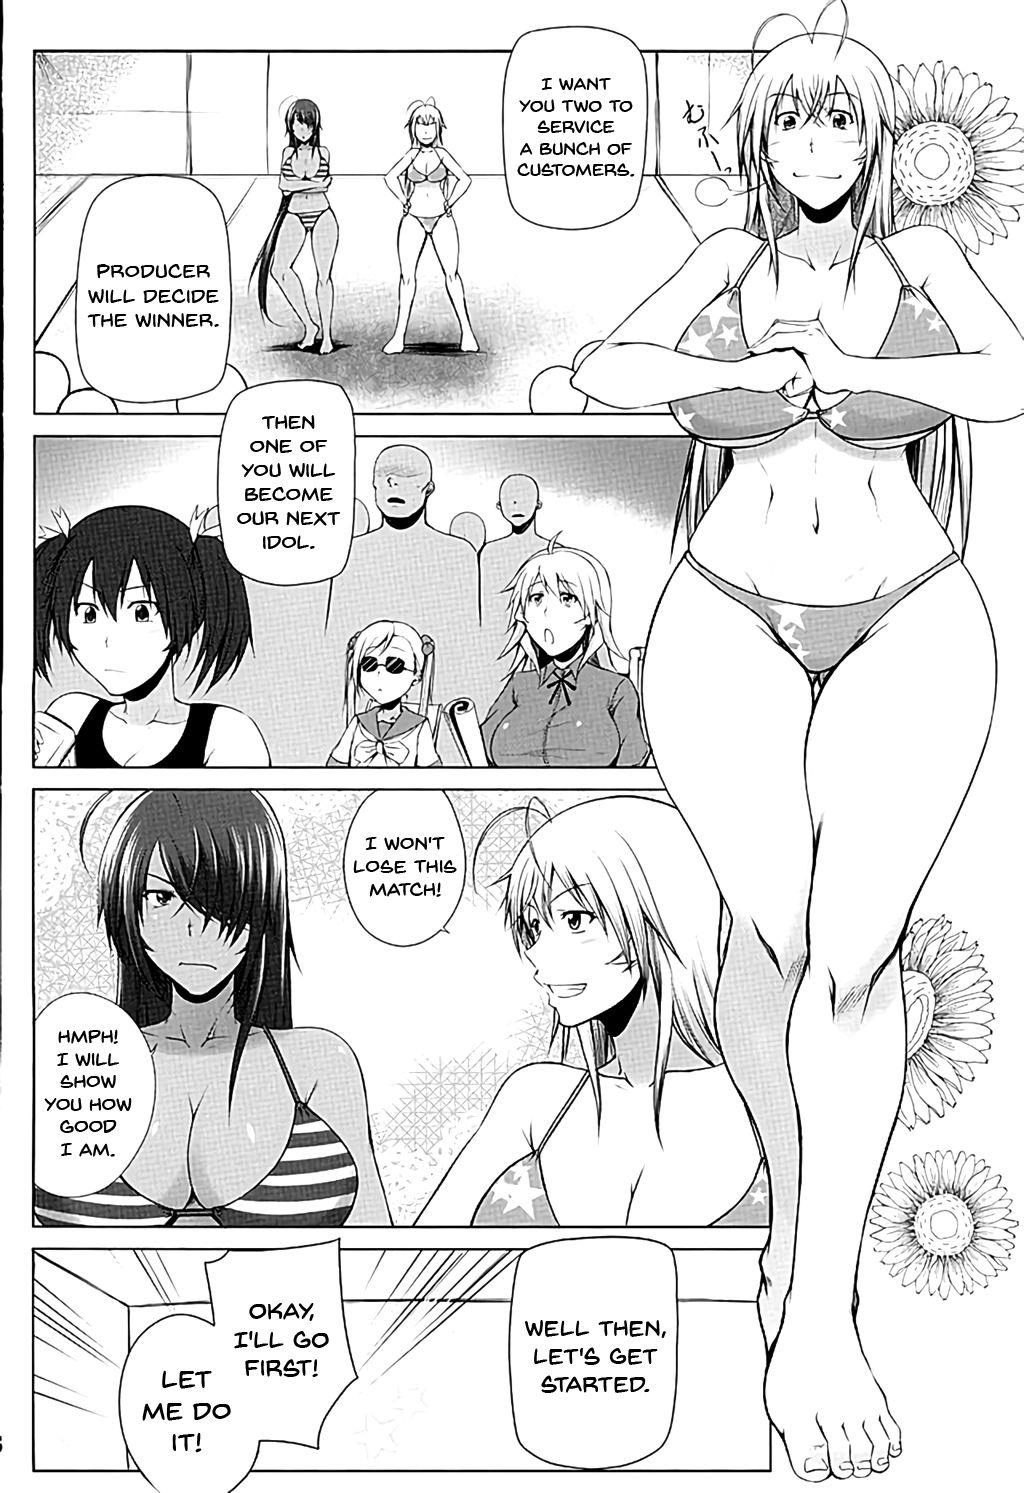 Hardcore Fucking H na Omise no Toku A Toushi Go&Shock | A Special A Rank Fighter At The H Shop Go&Shock - Ikkitousen Transgender - Page 7